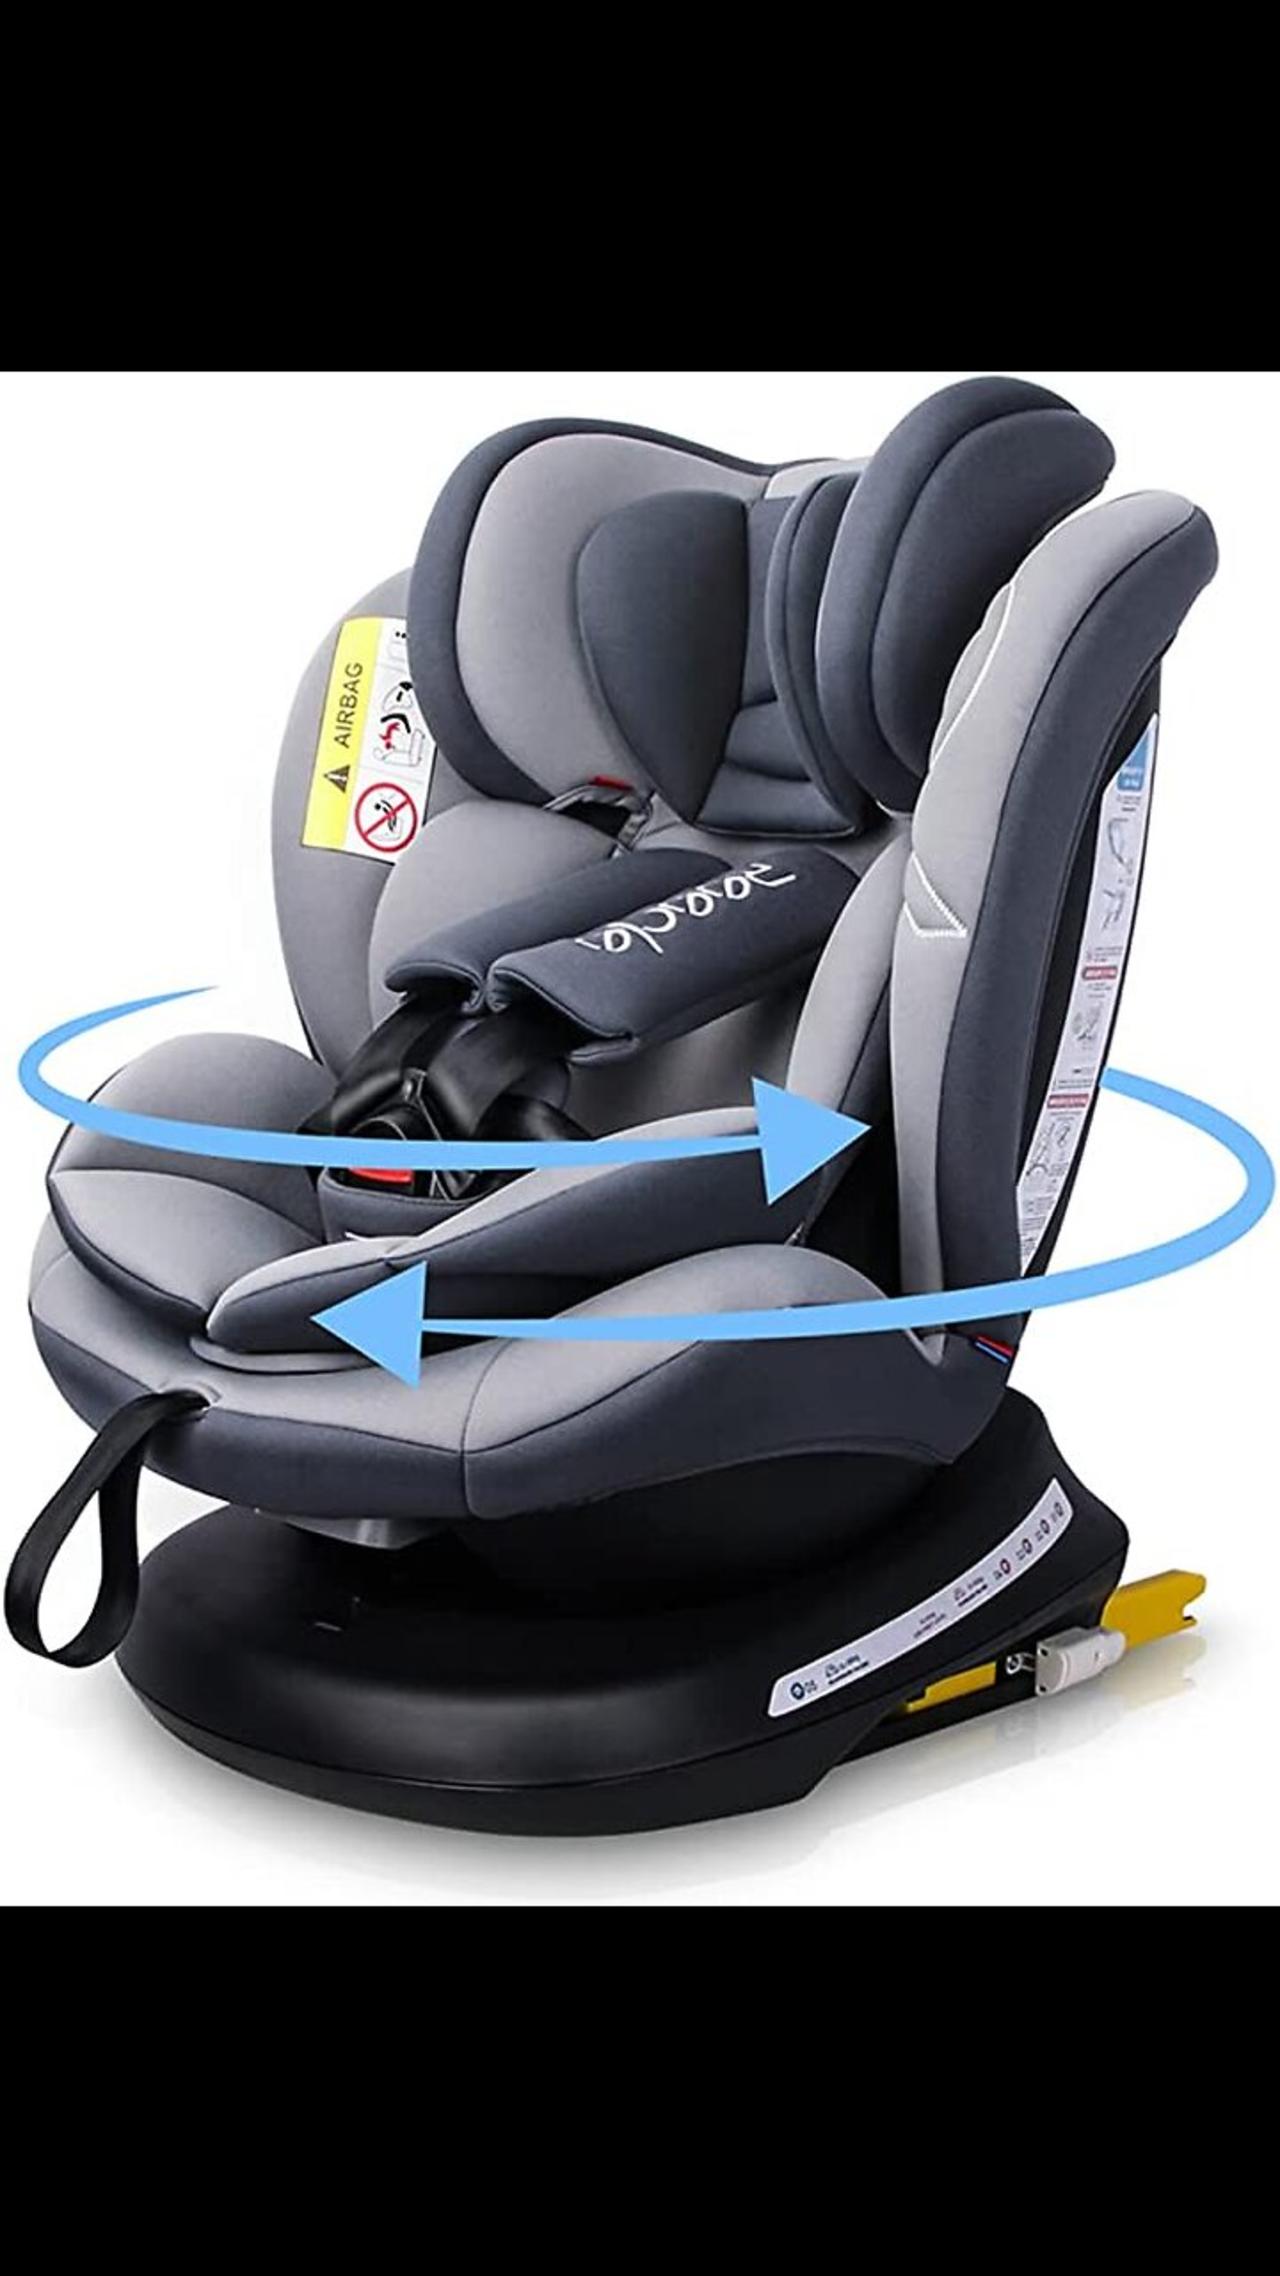 Reecle 360° swivel car seat with ISOFIX, Link in discription